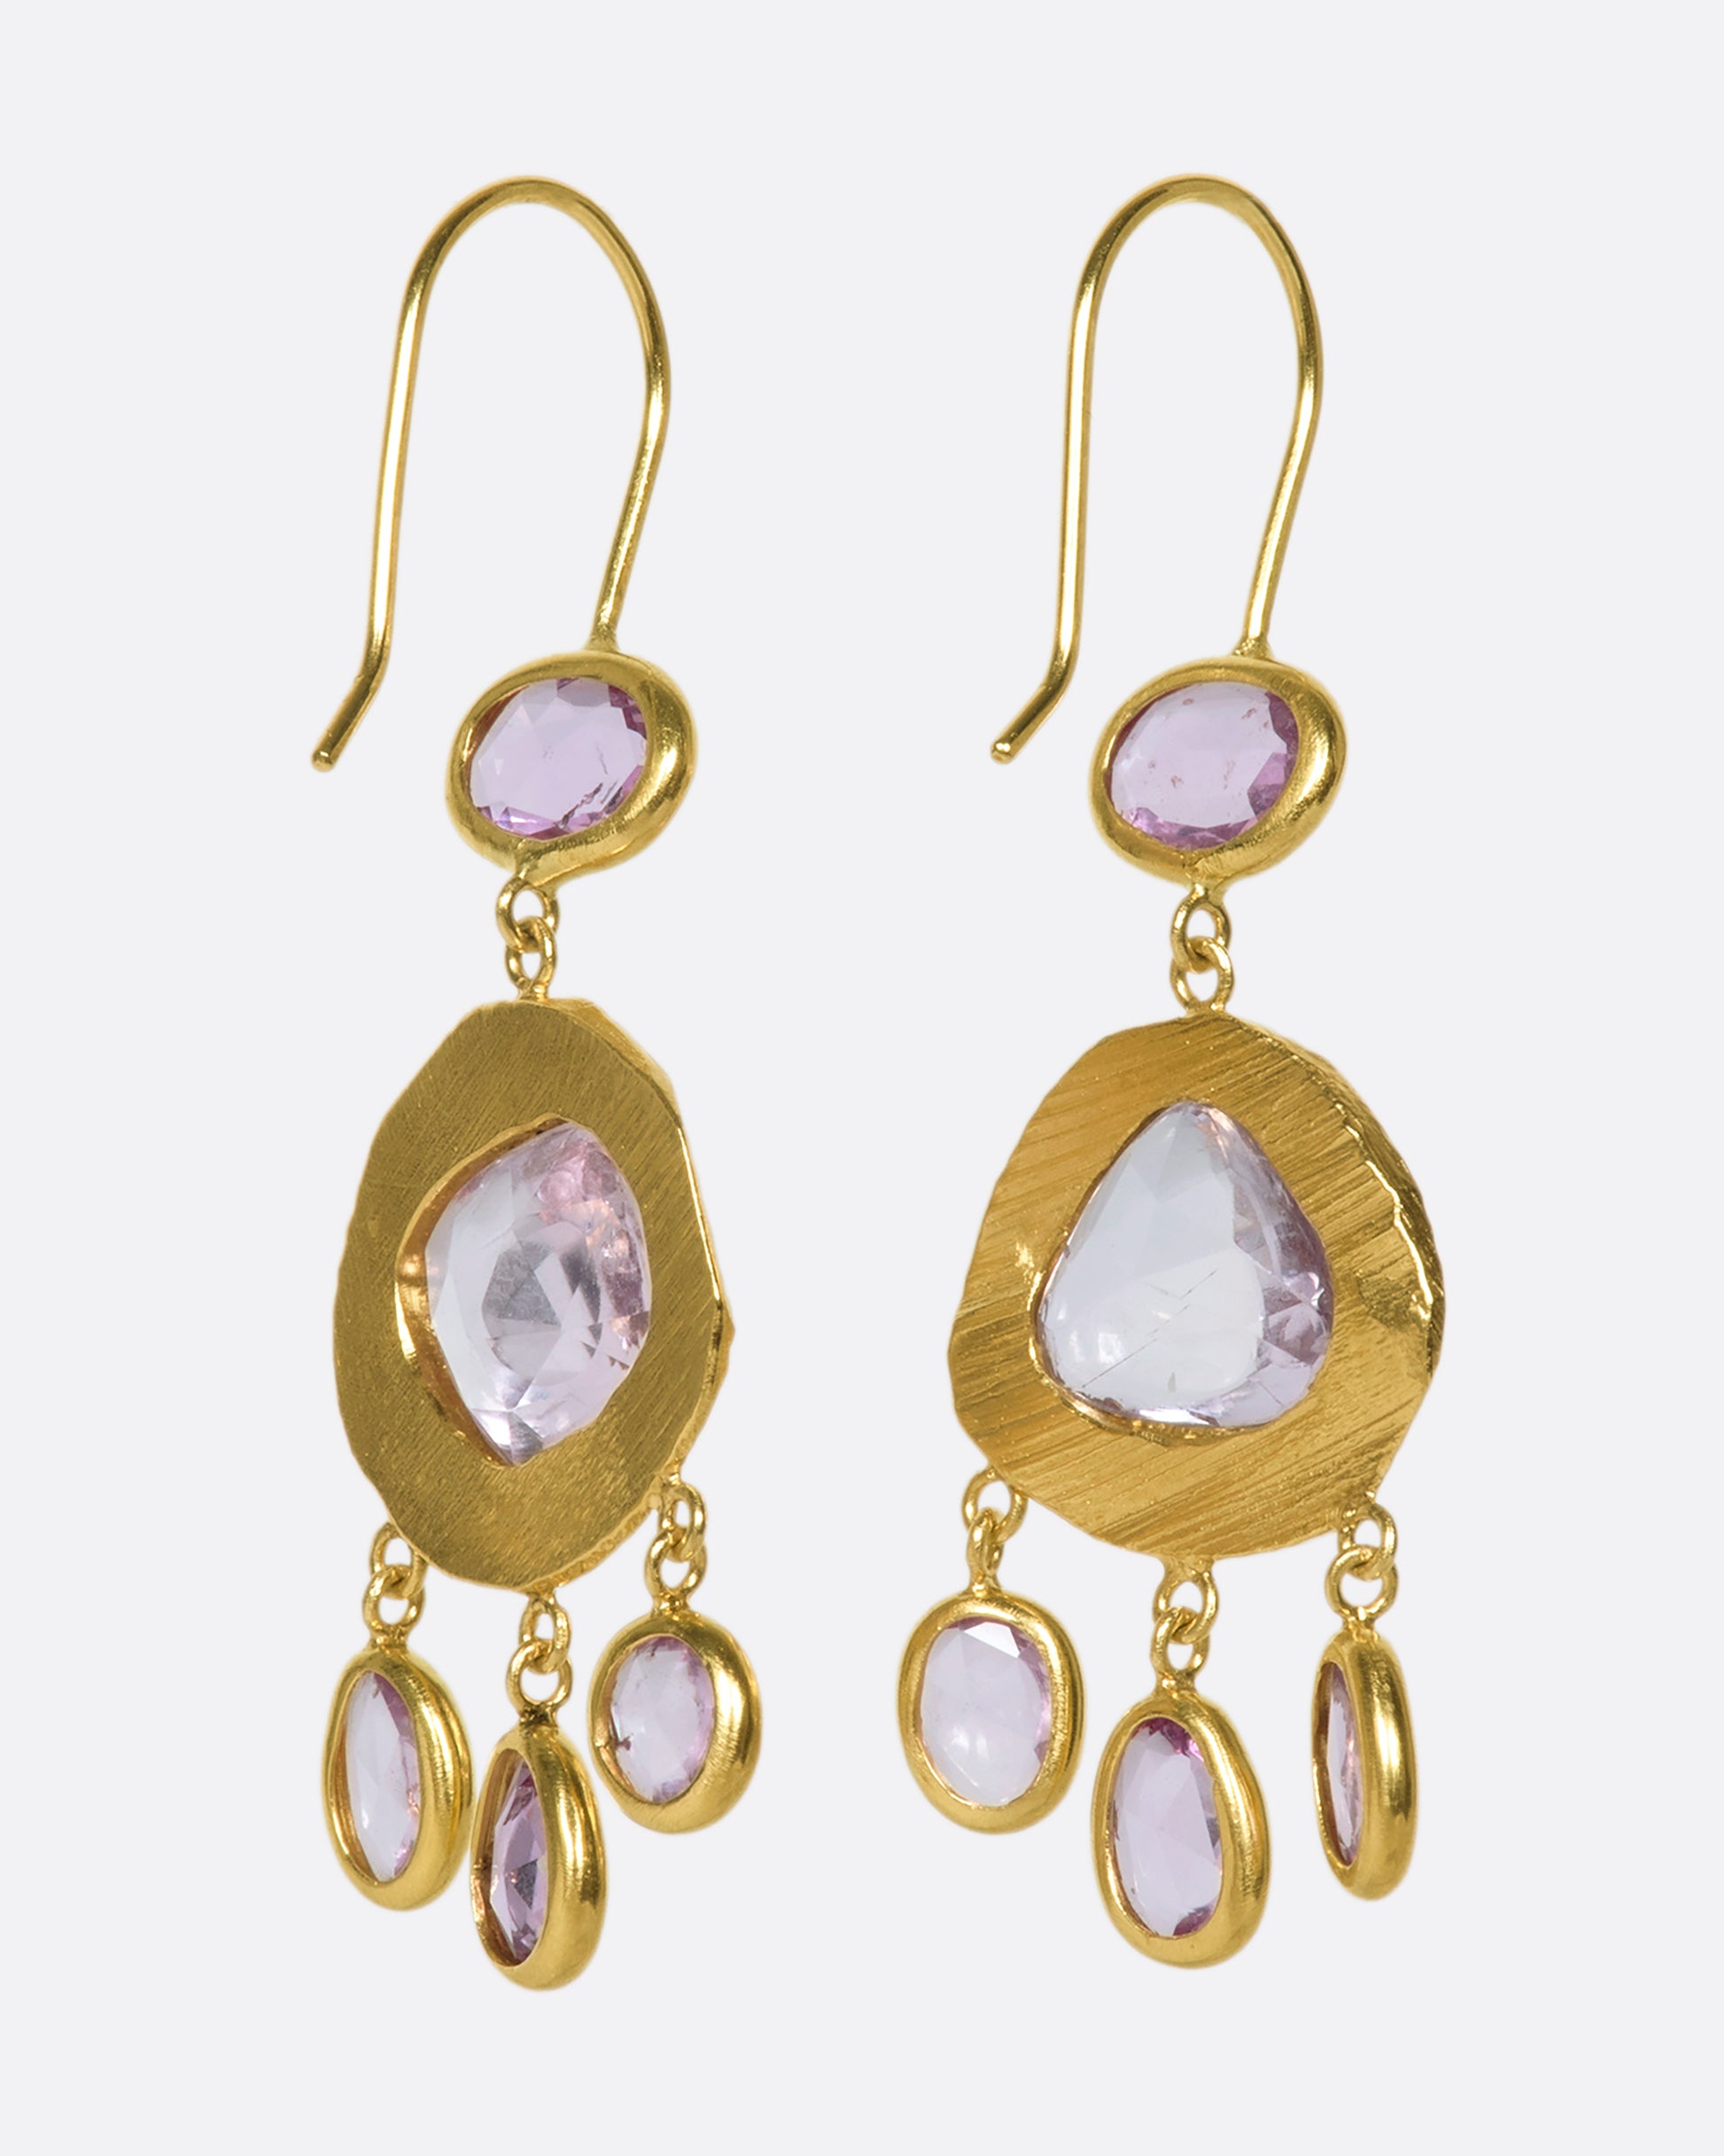 One-of-a-kind three-tiered dangle earrings with pink sapphires set in 18k gold.